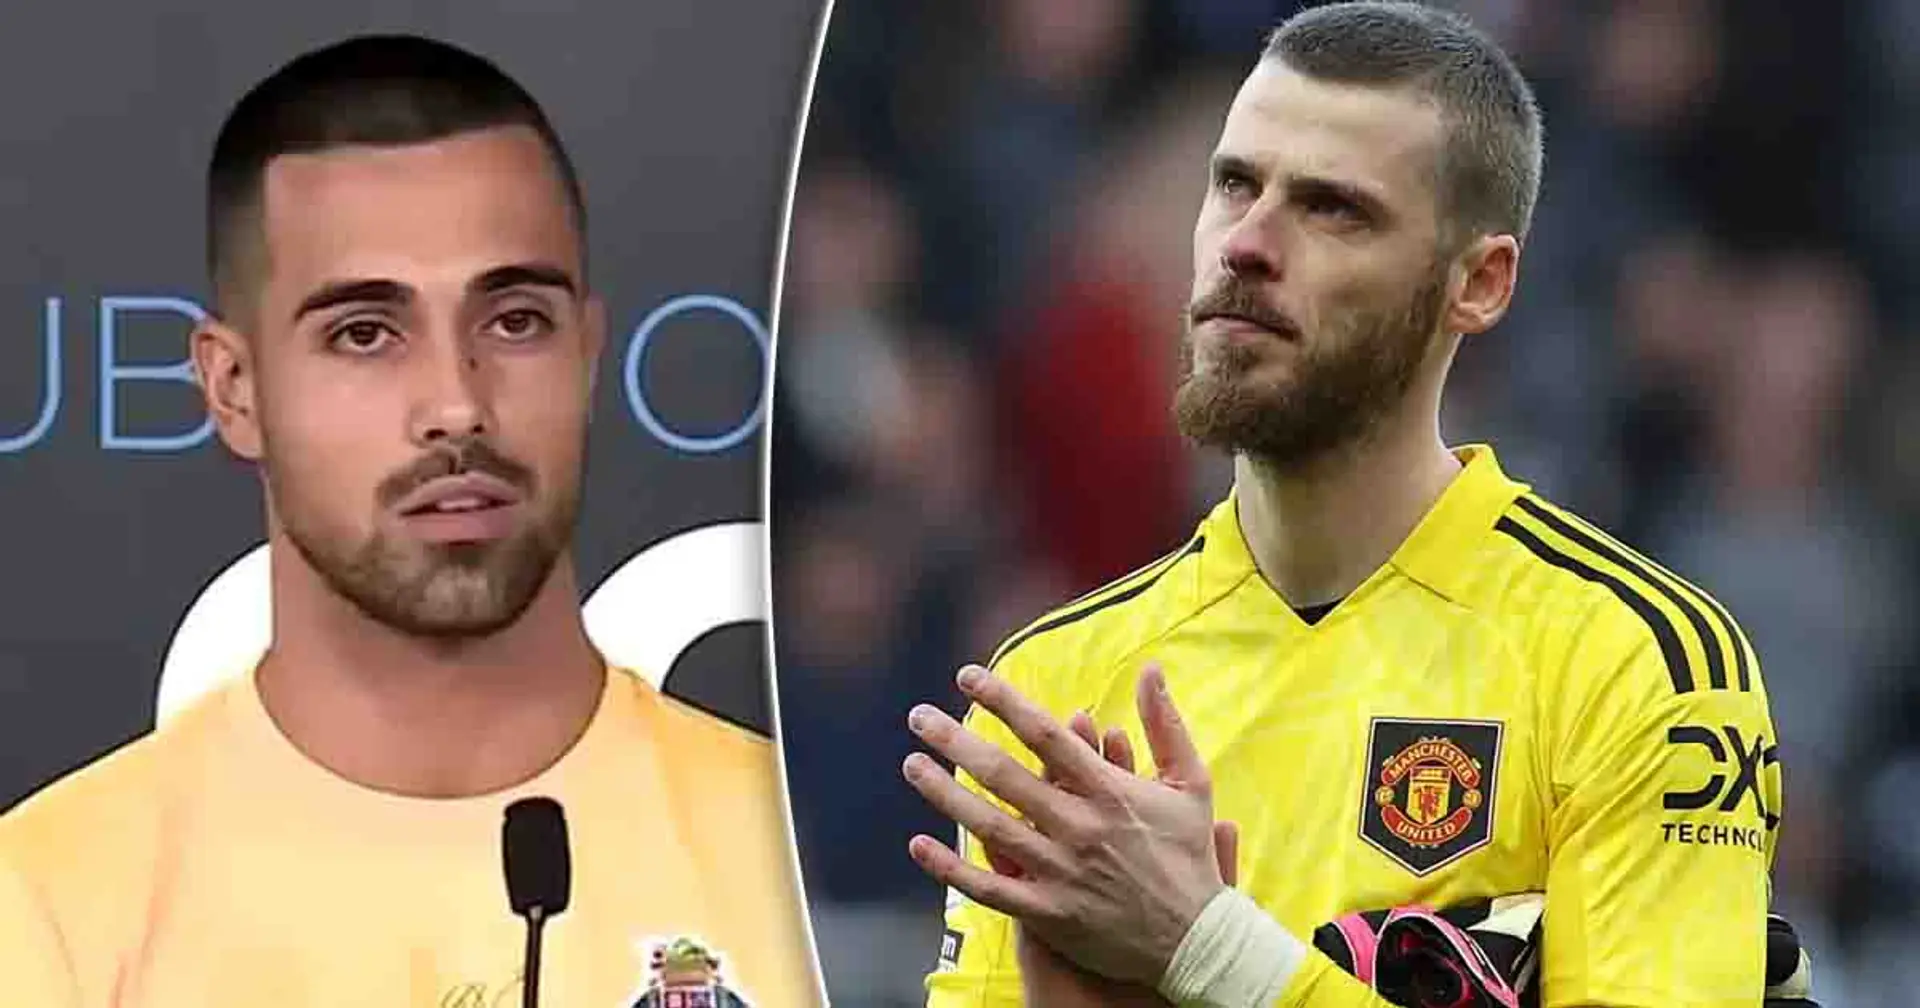 FC Porto goalkeeper Diogo Costa gives quirky response to Man United links